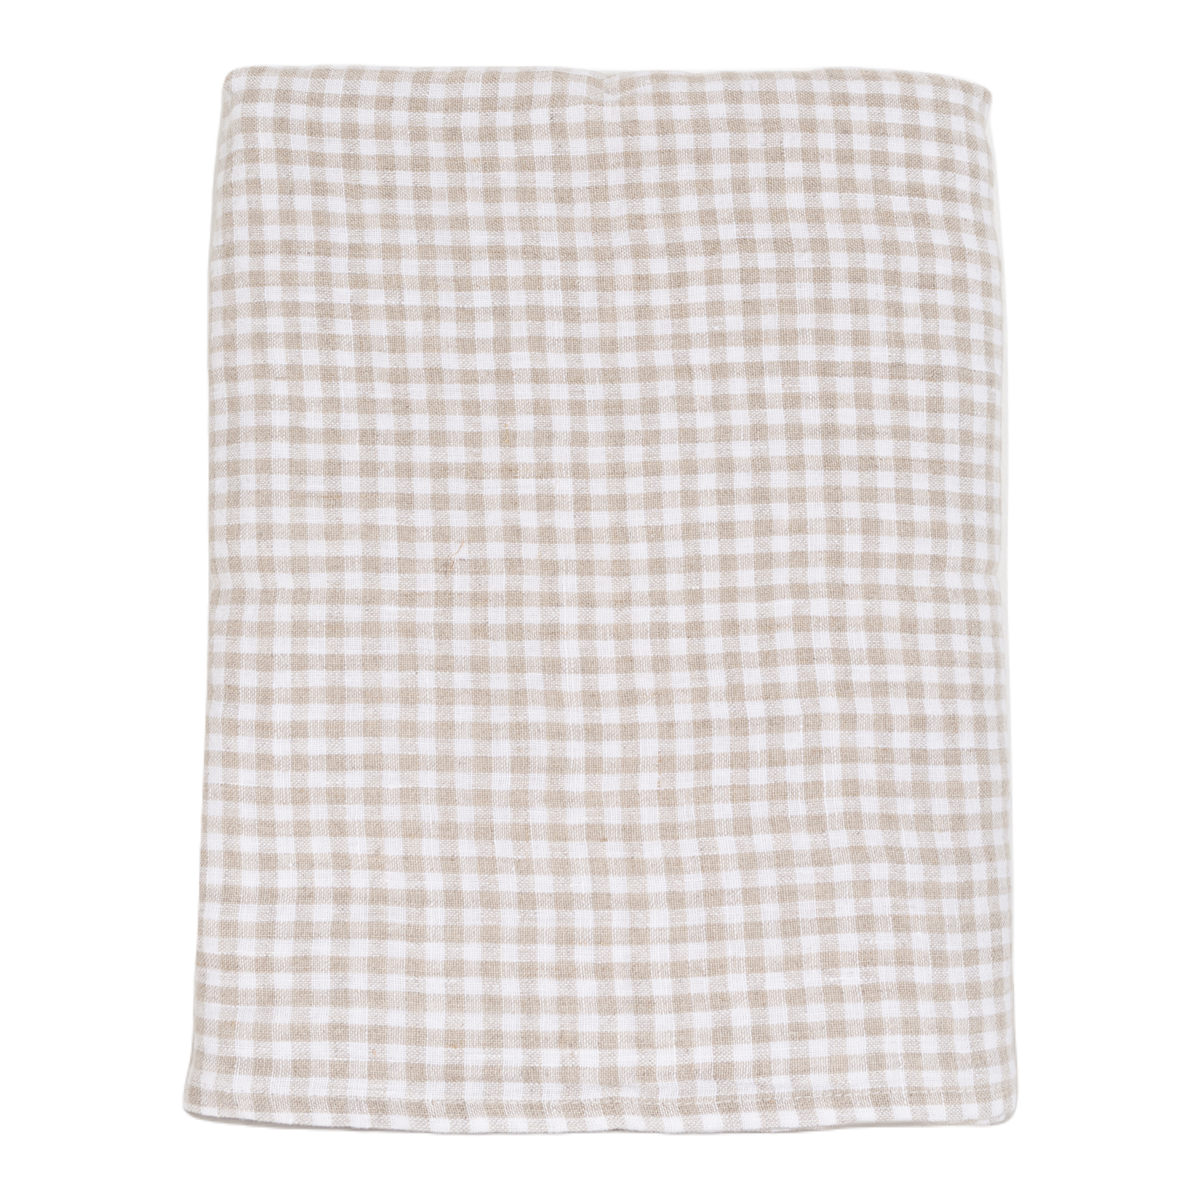 Perfect for any season with its timeless checked pattern, the Linen Check Napkin/Placement is perfect for elevating your tabletop collection and is made out of 100% European Flax c